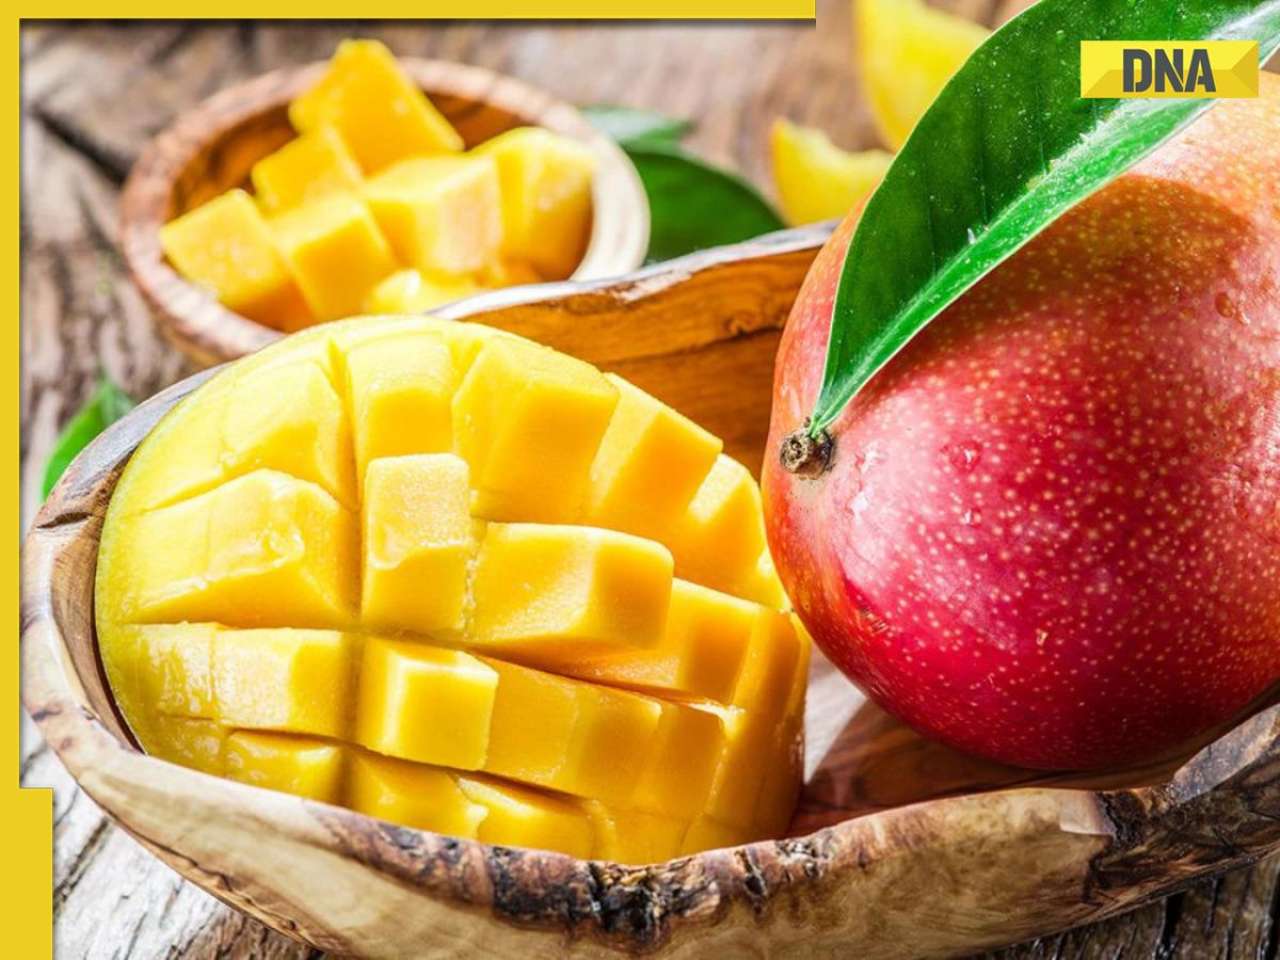 This variety of mango costs Rs 2.50-3 lakh a kg, know why